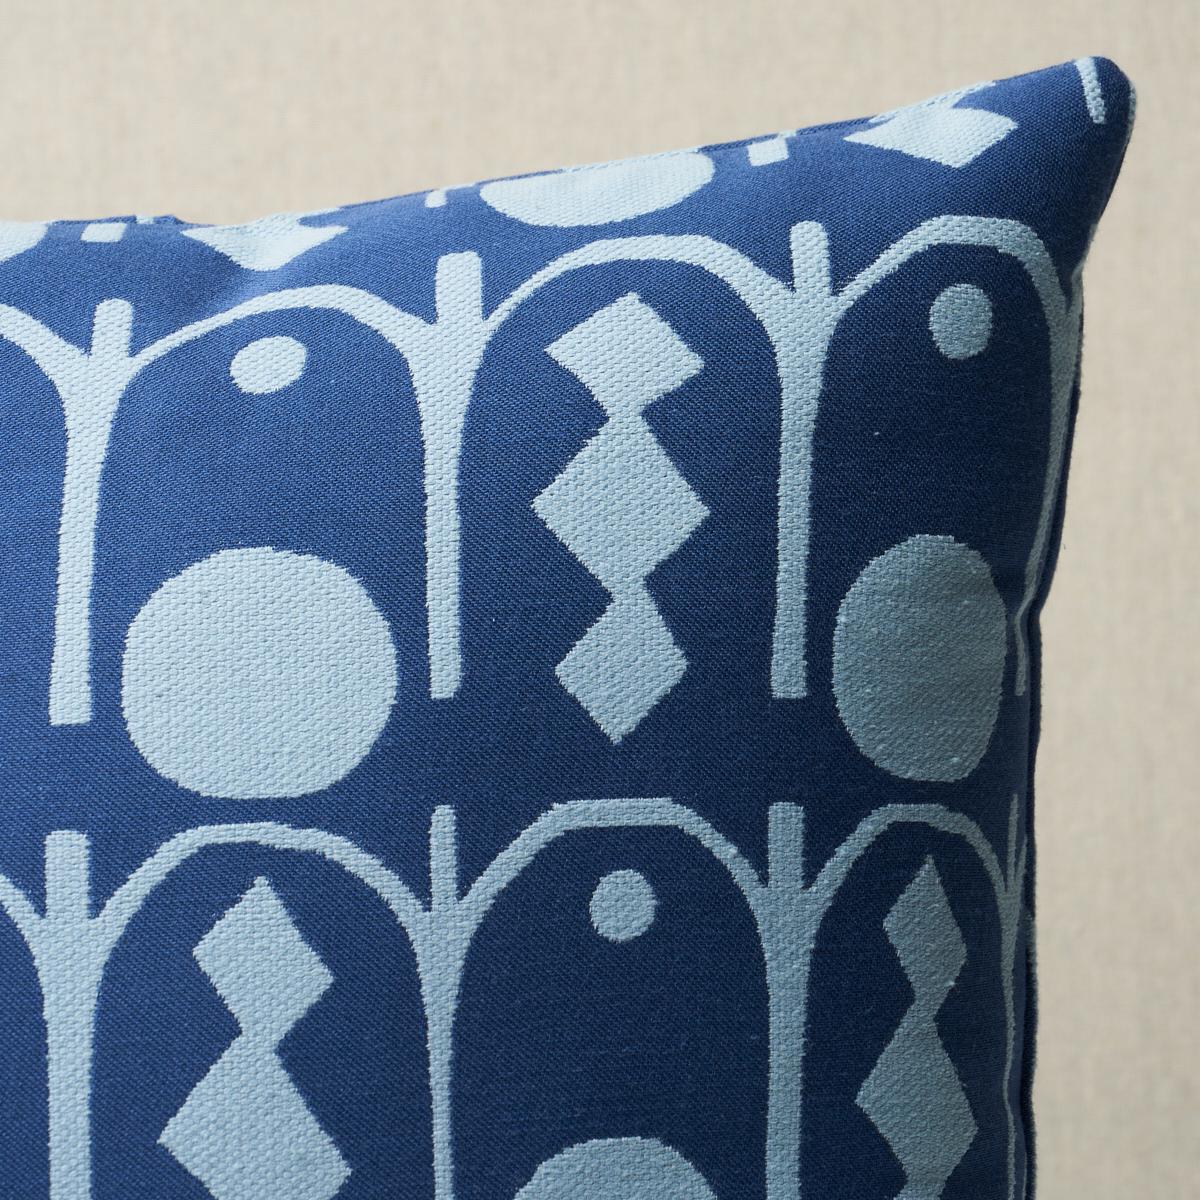 This pillow features Downtown by Drusus Tabor with a knife edge finish. Created in collaboration with Drusus Tabor, Downtown is a textural small-scale geometric pattern created on a jacquard loom. Pillow includes a feather/down fill insert and